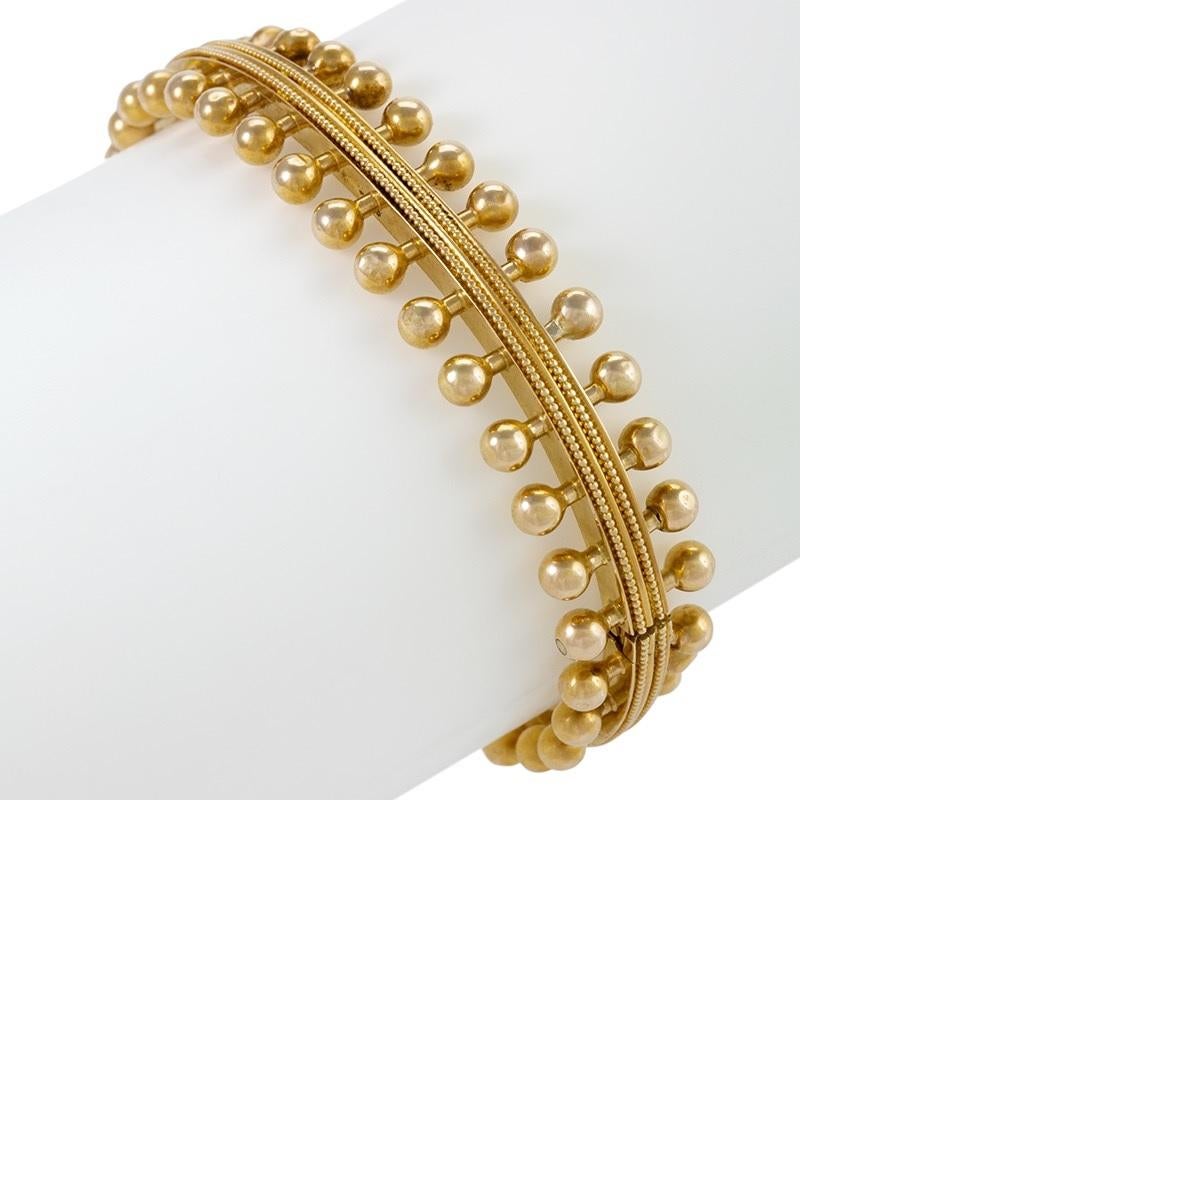 An English Victorian 18 karat gold bracelet by famed Renaissance Revival jewelry designer Robert Phillips. The bangle features a central band of delicate granulation work, with Phillips's hallmark round motifs decorating either side. Phillips was a